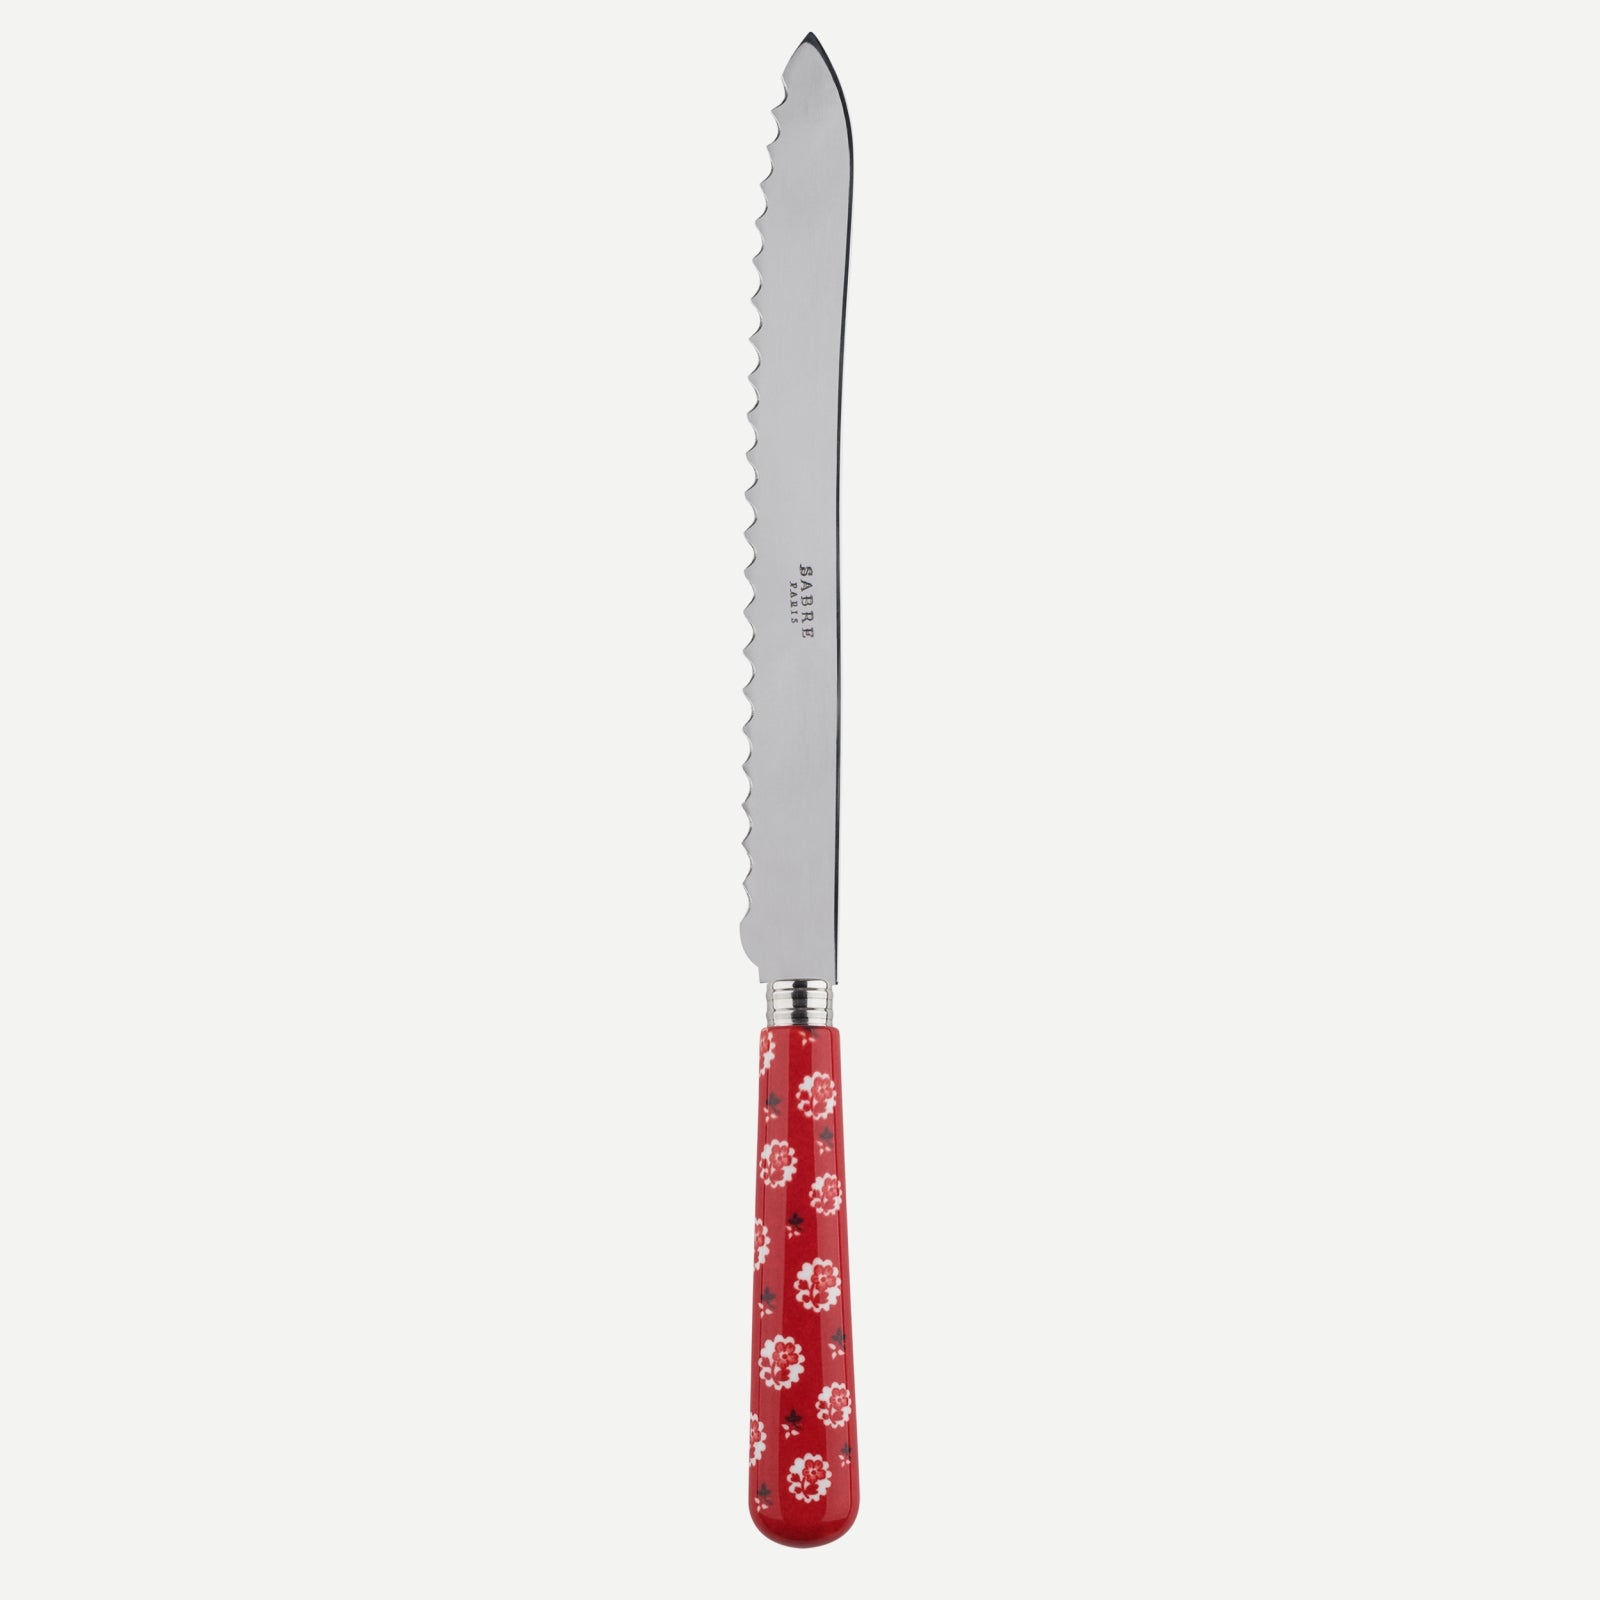 Bread knife - Provencal - Red